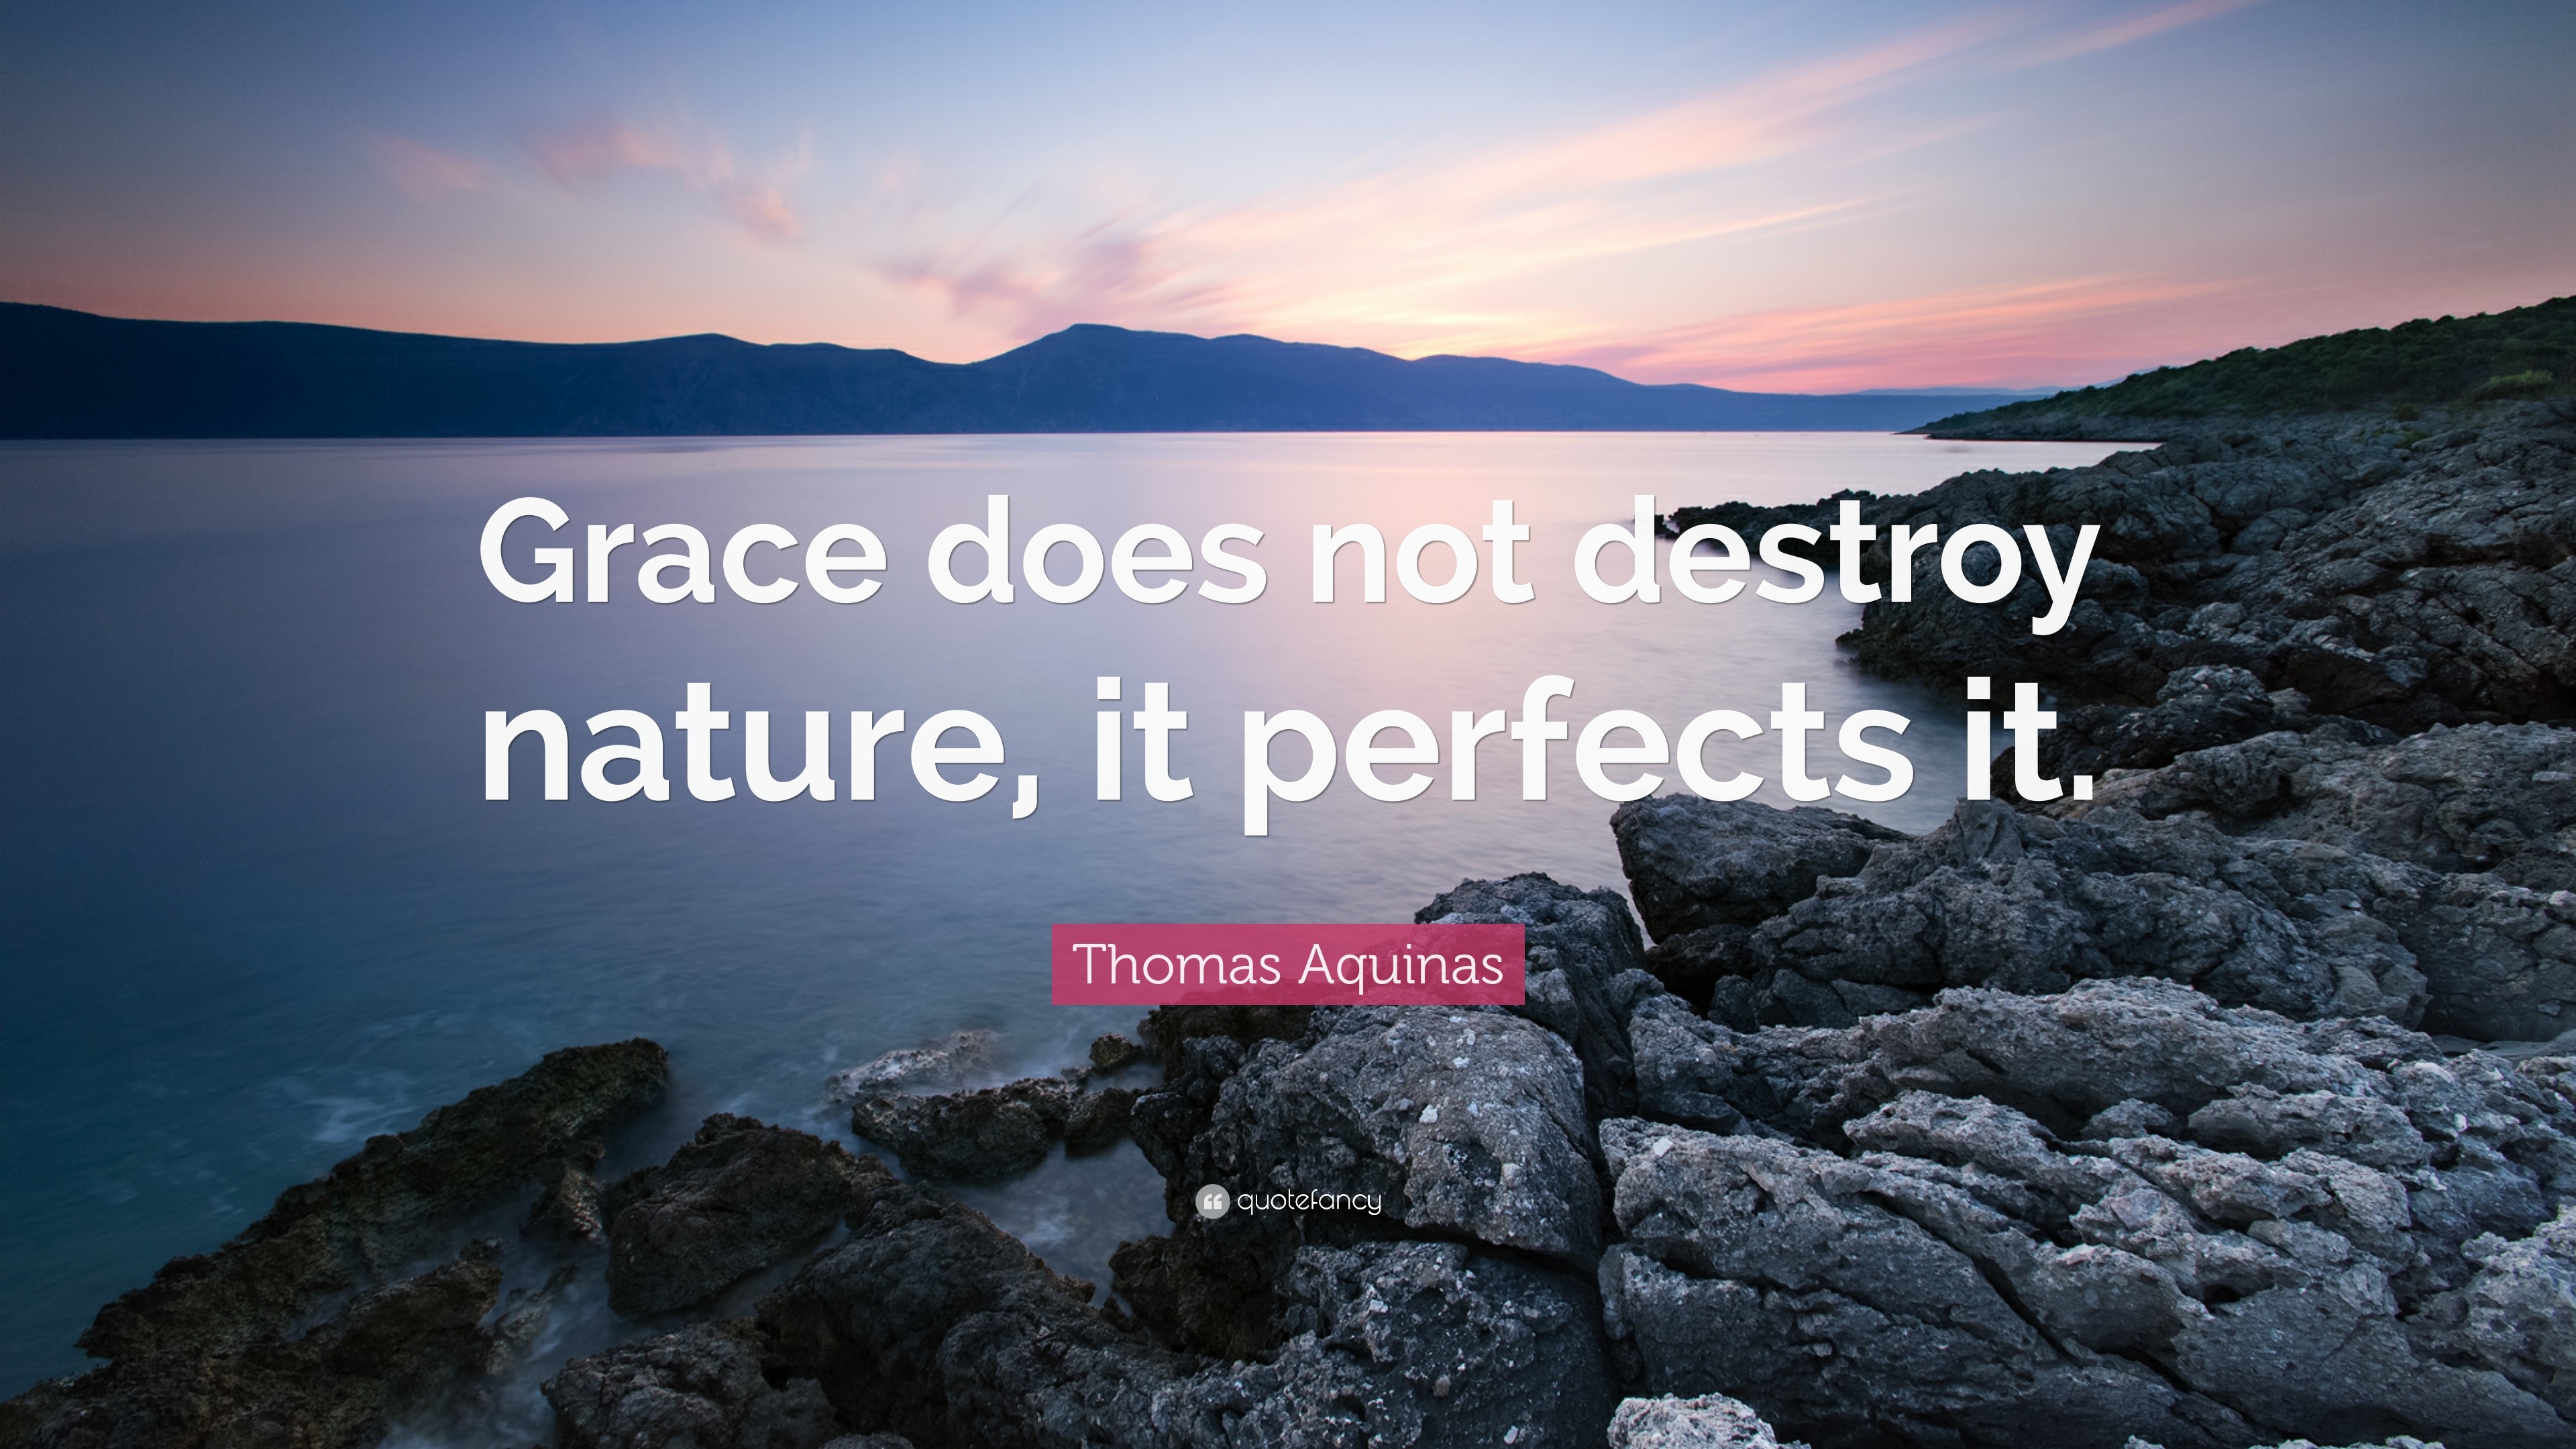 Thomas Aquinas Quote: does not destroy nature, it perfects